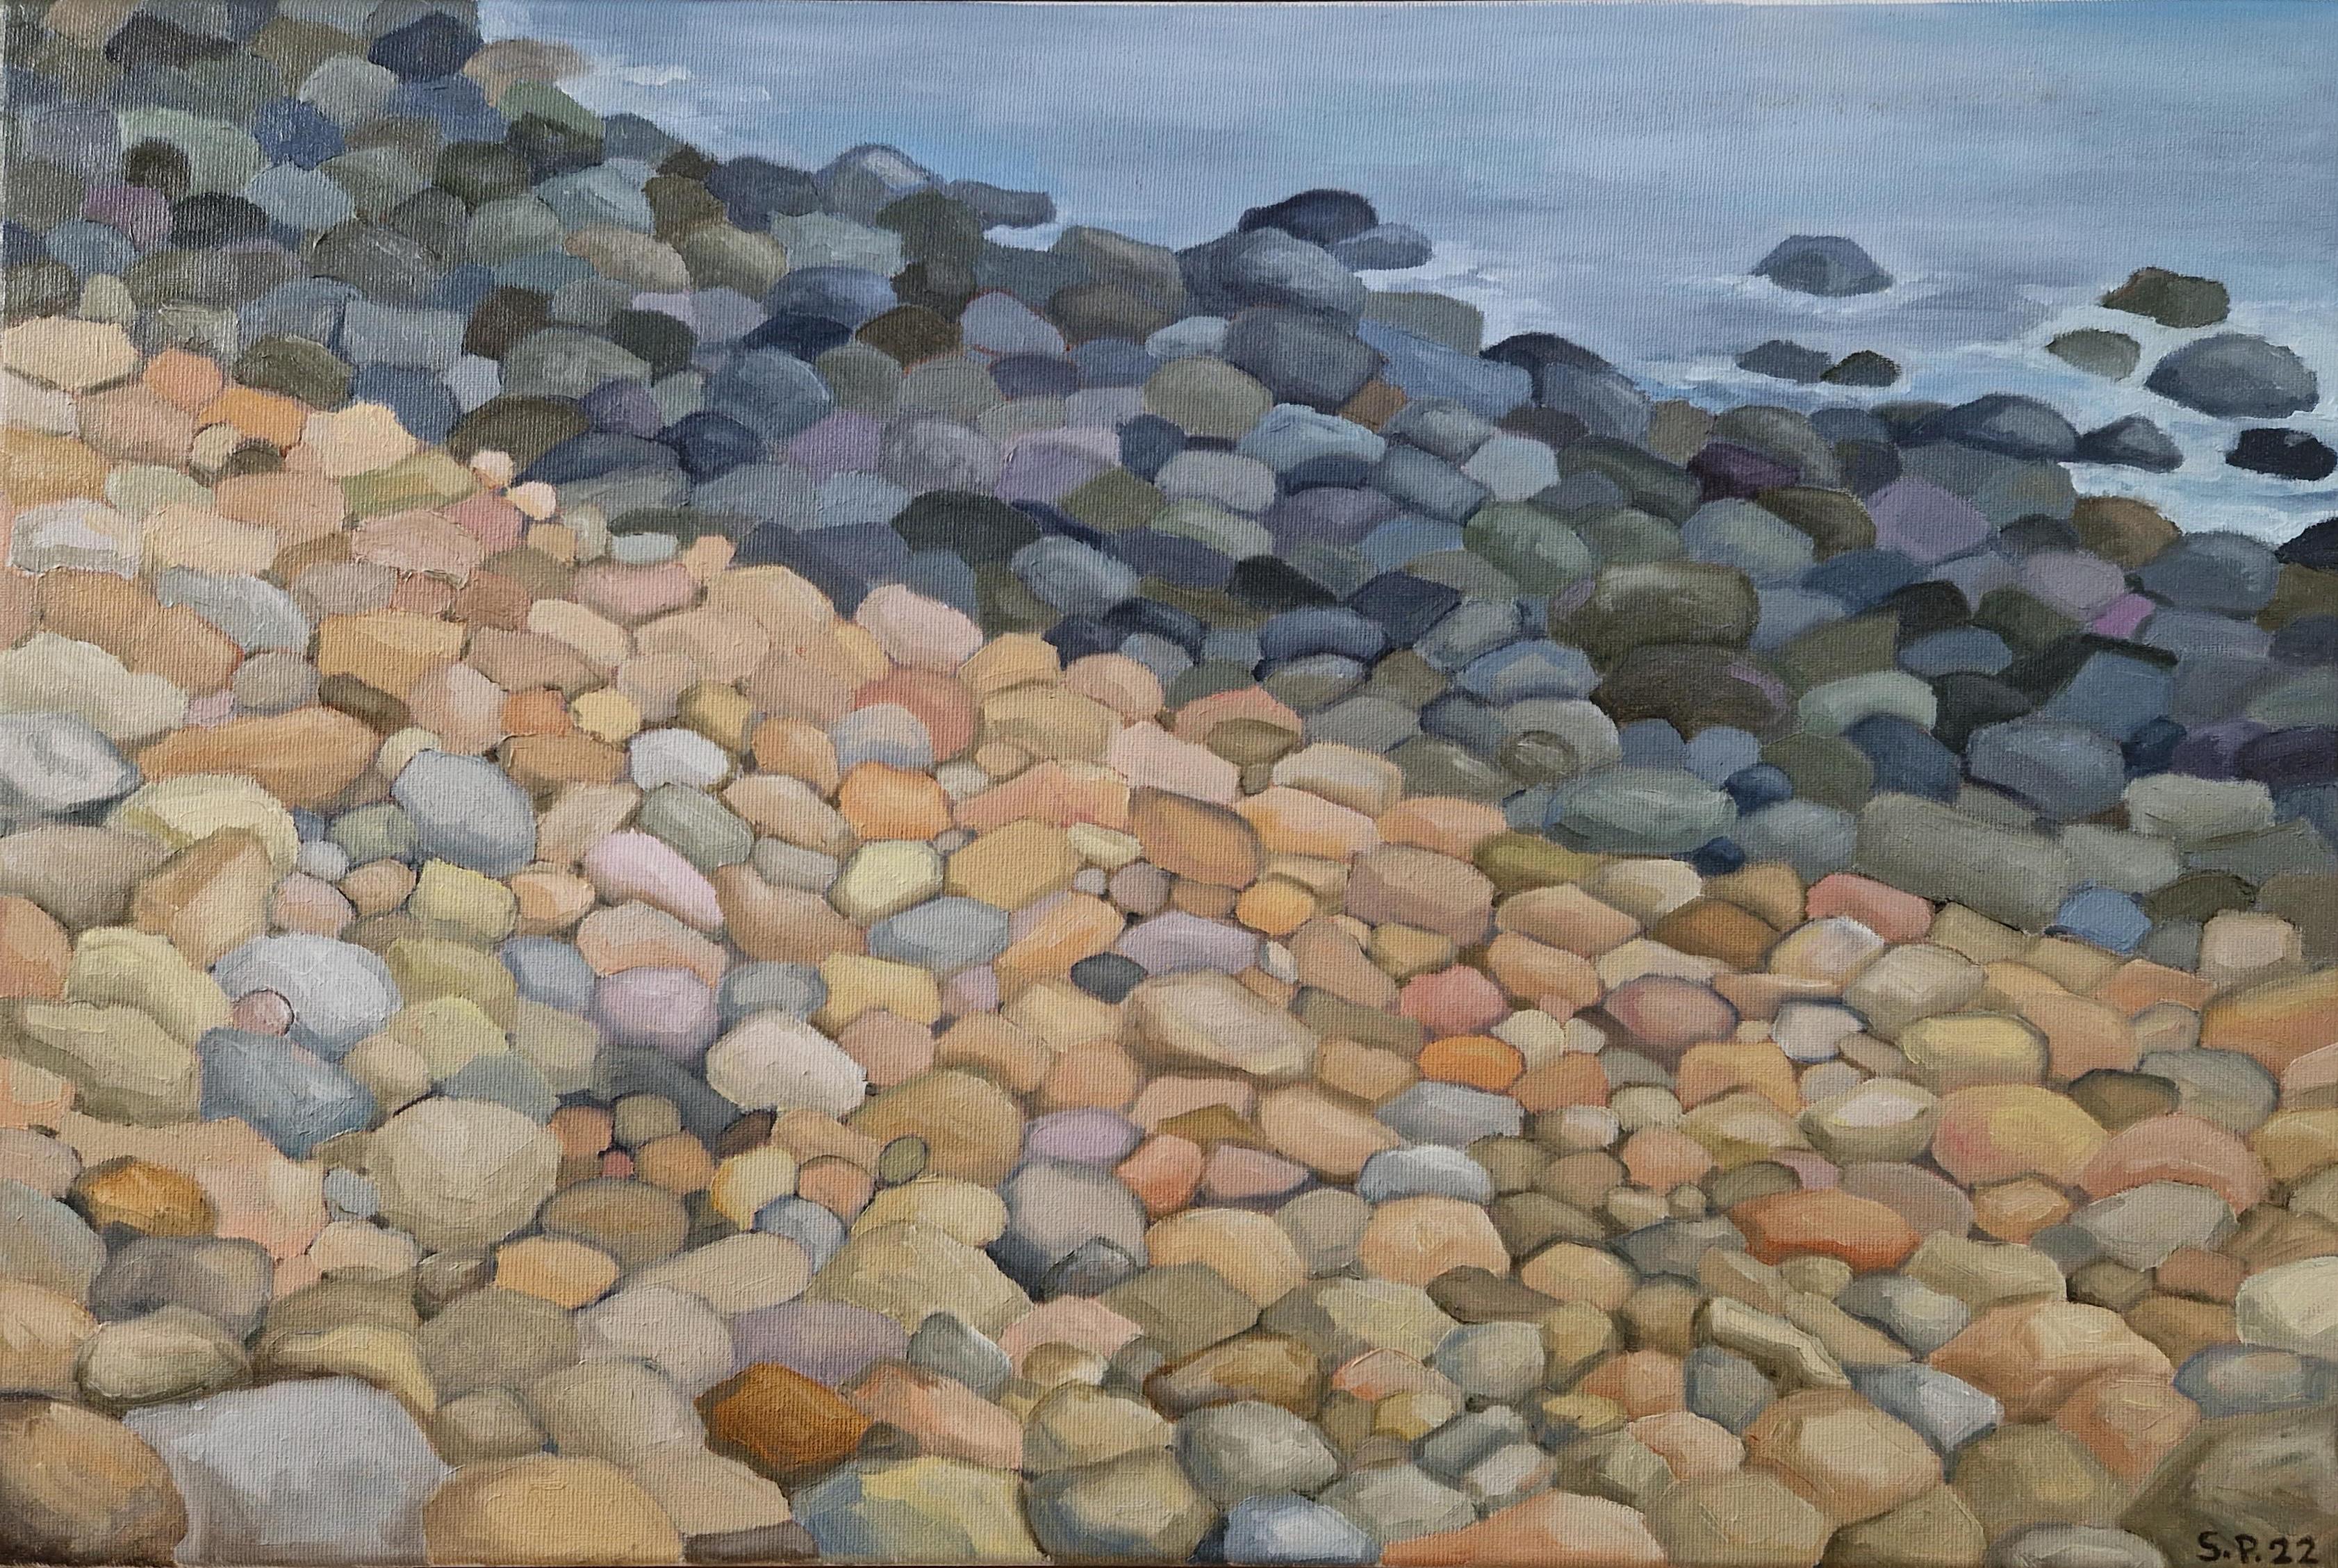 The painting 'Yellow Stones'.